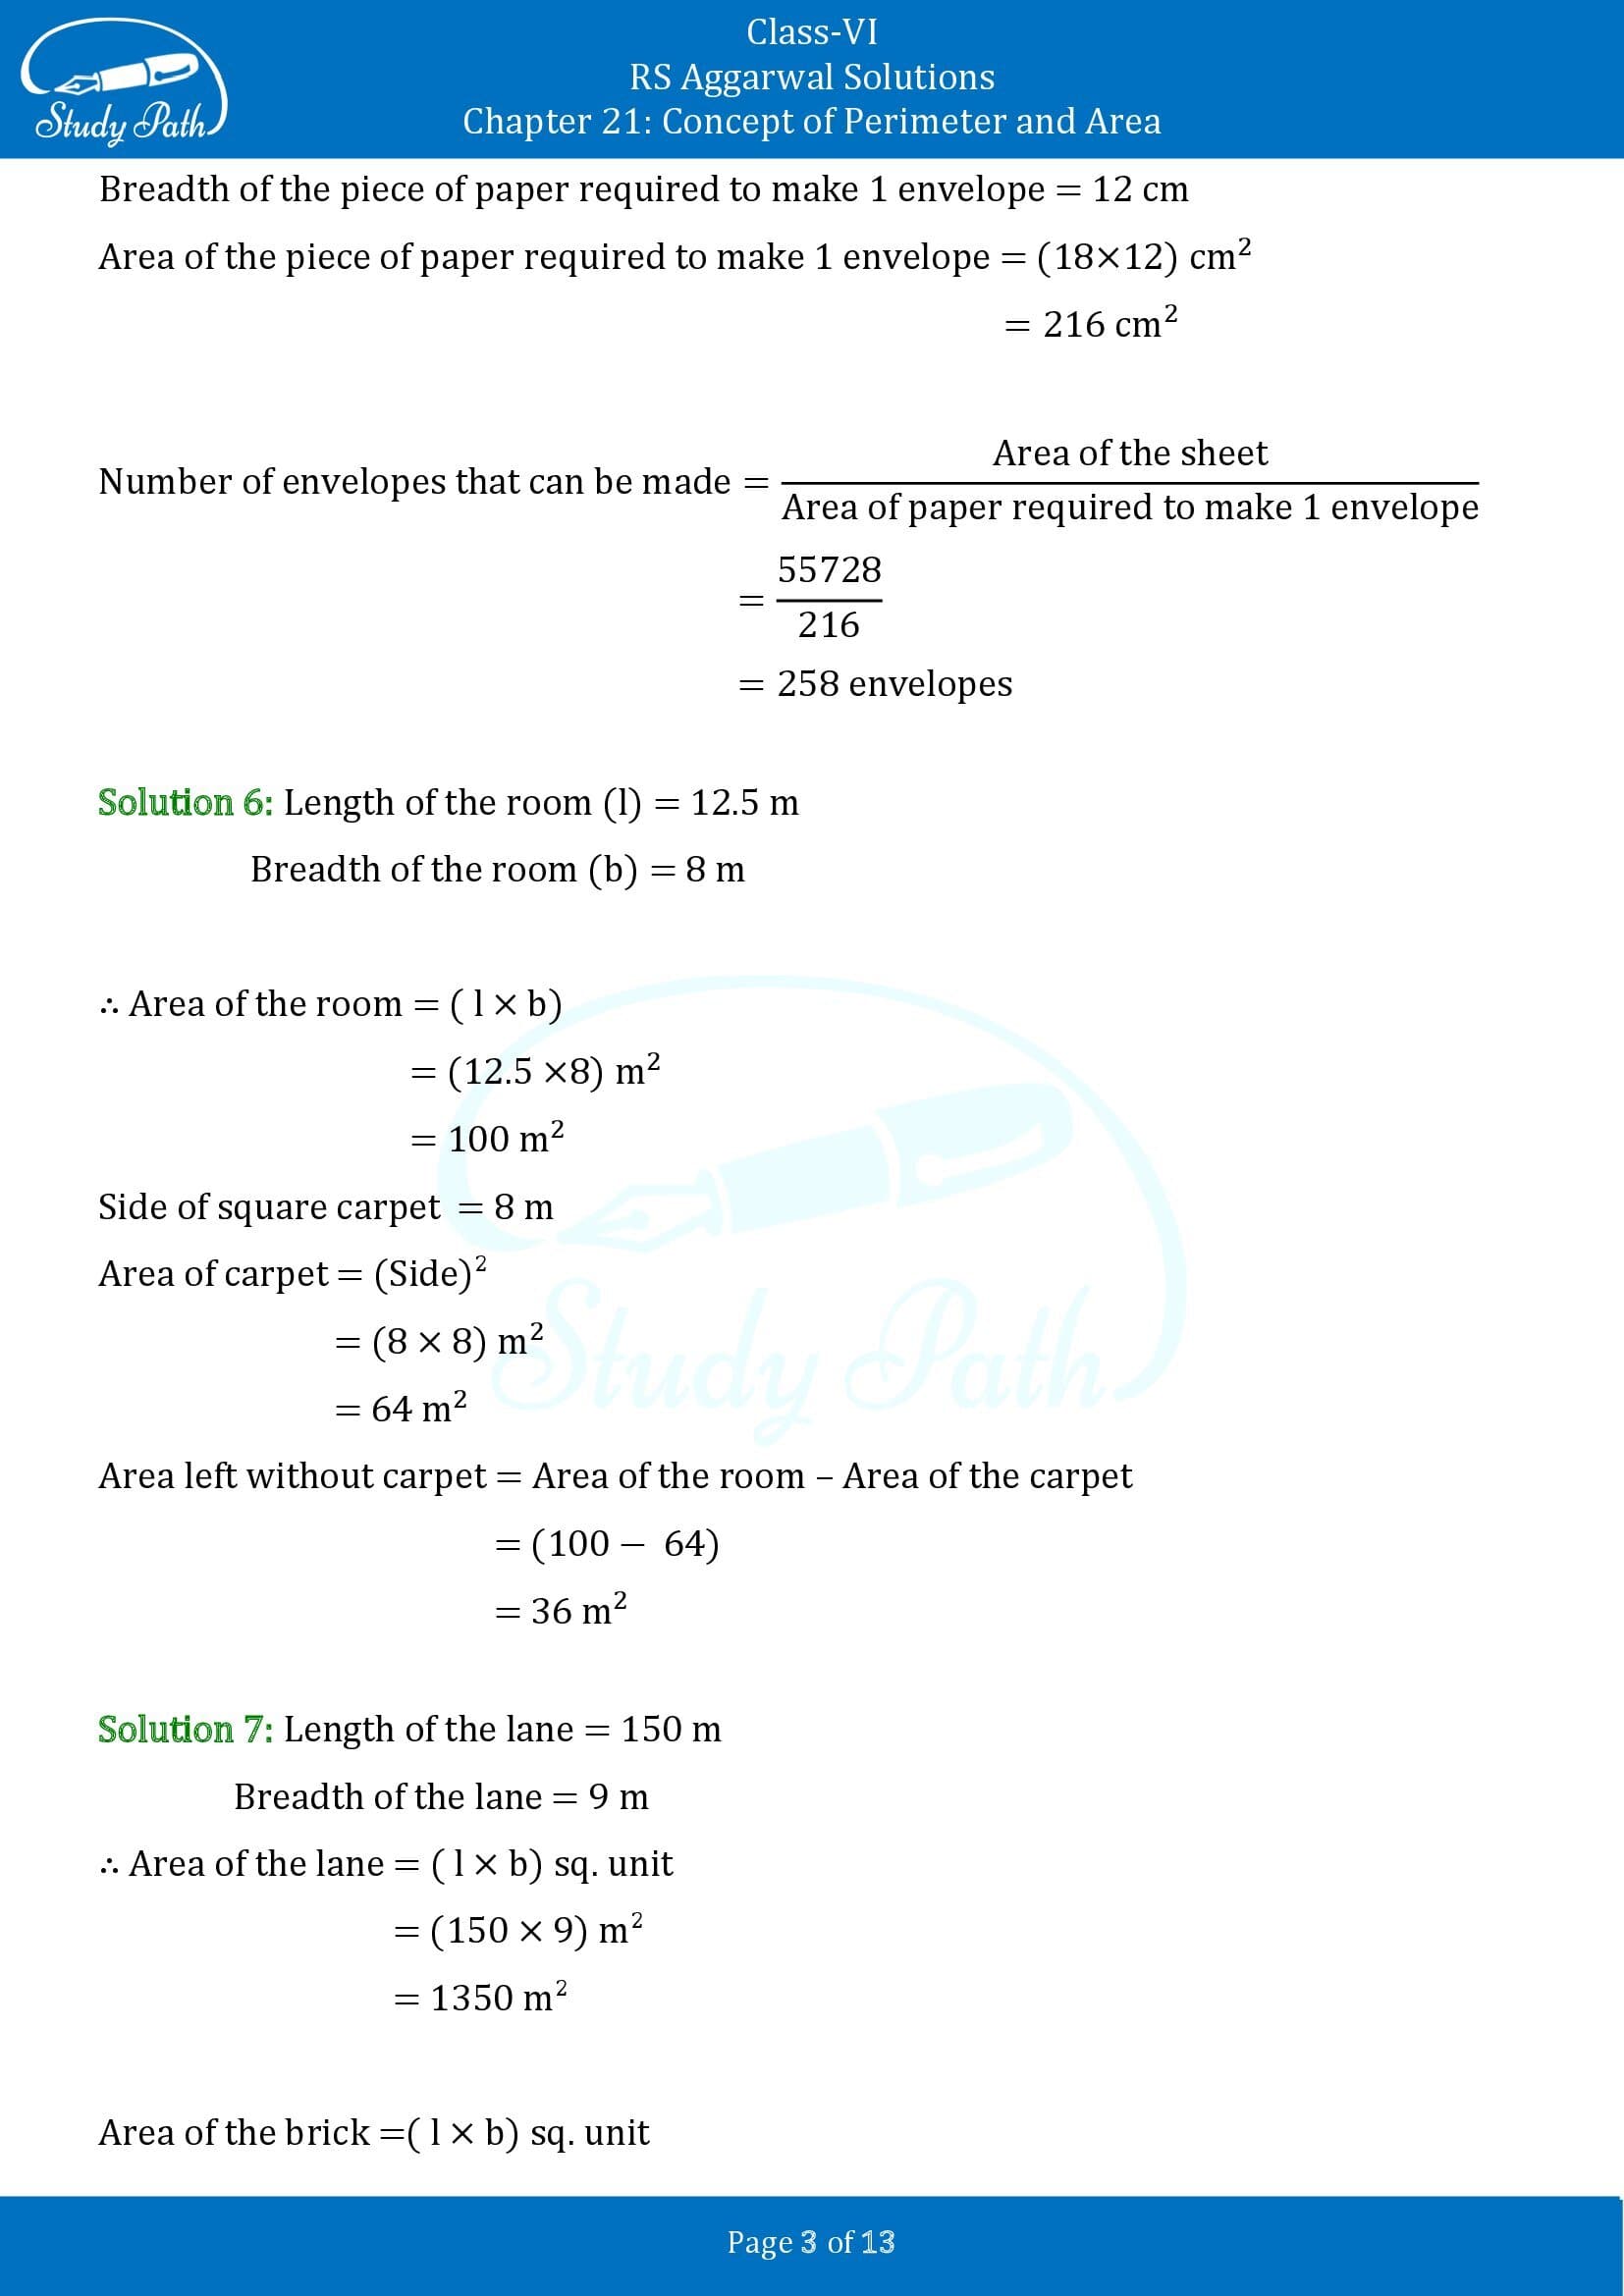 RS Aggarwal Solutions Class 6 Chapter 21 Concept of Perimeter and Area Exercise 21D 00003